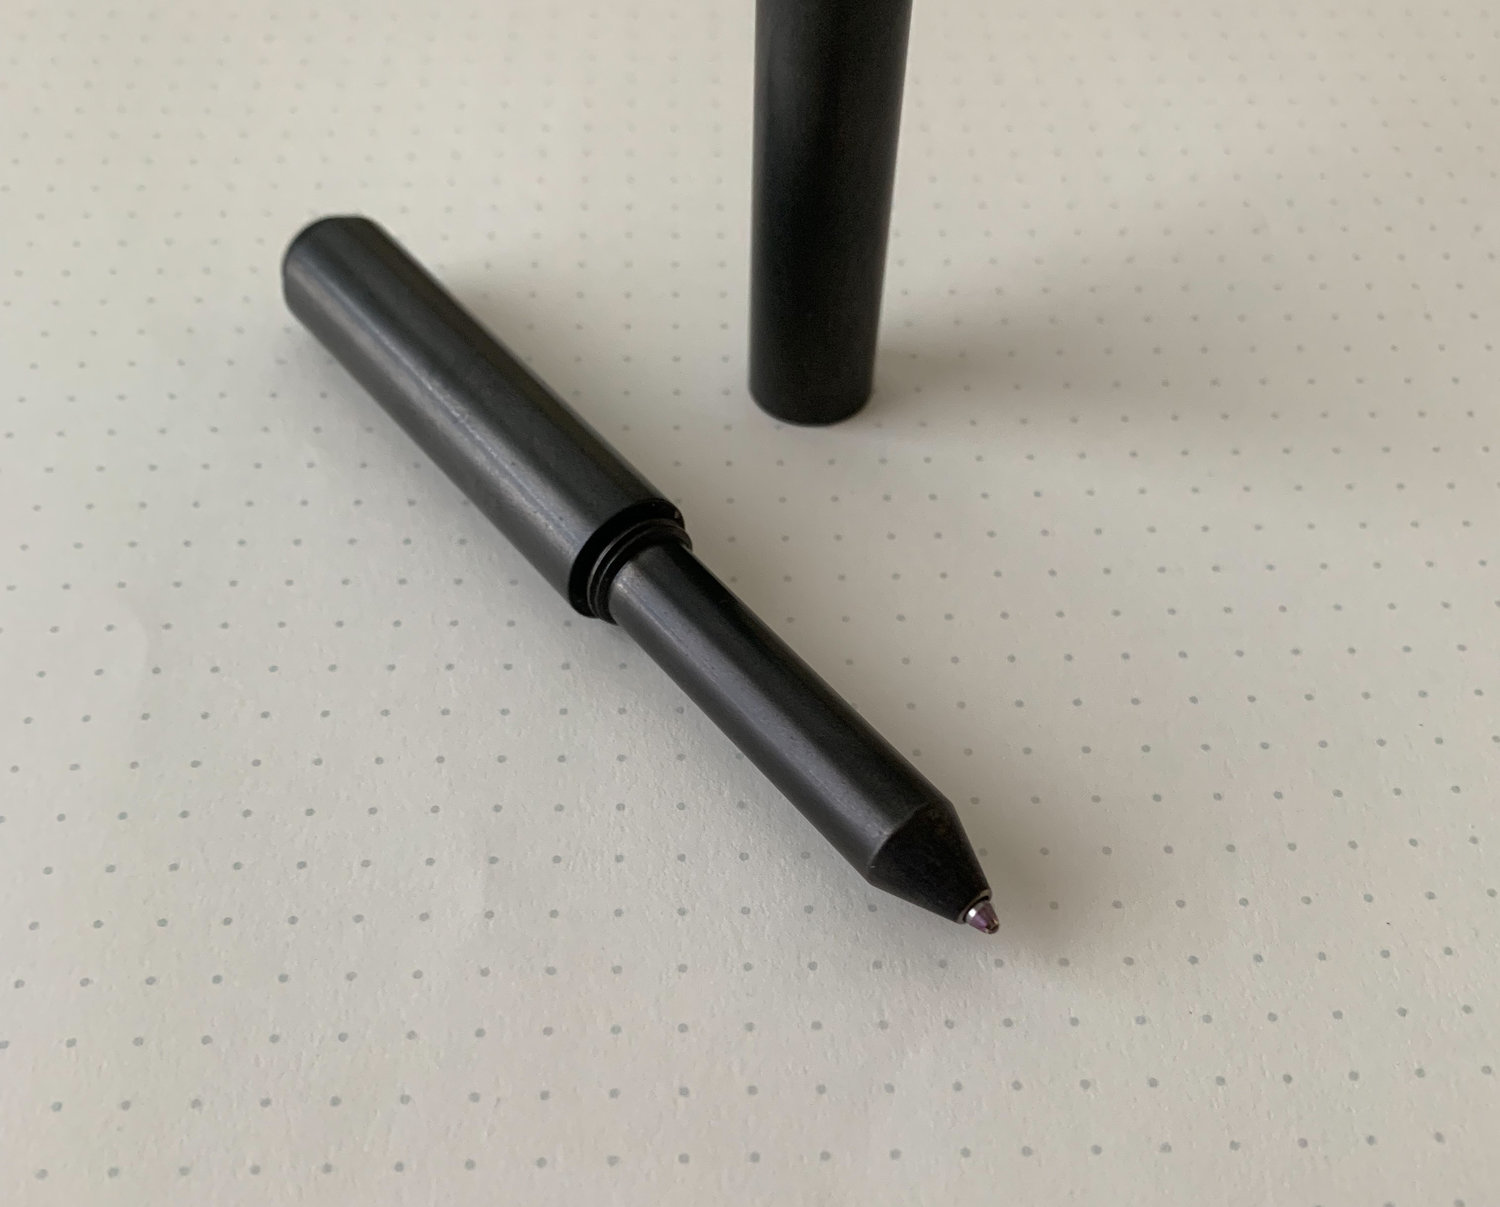 Pen Review: Schon DSGN Classic Machined Pen in PVD DLC Stainless